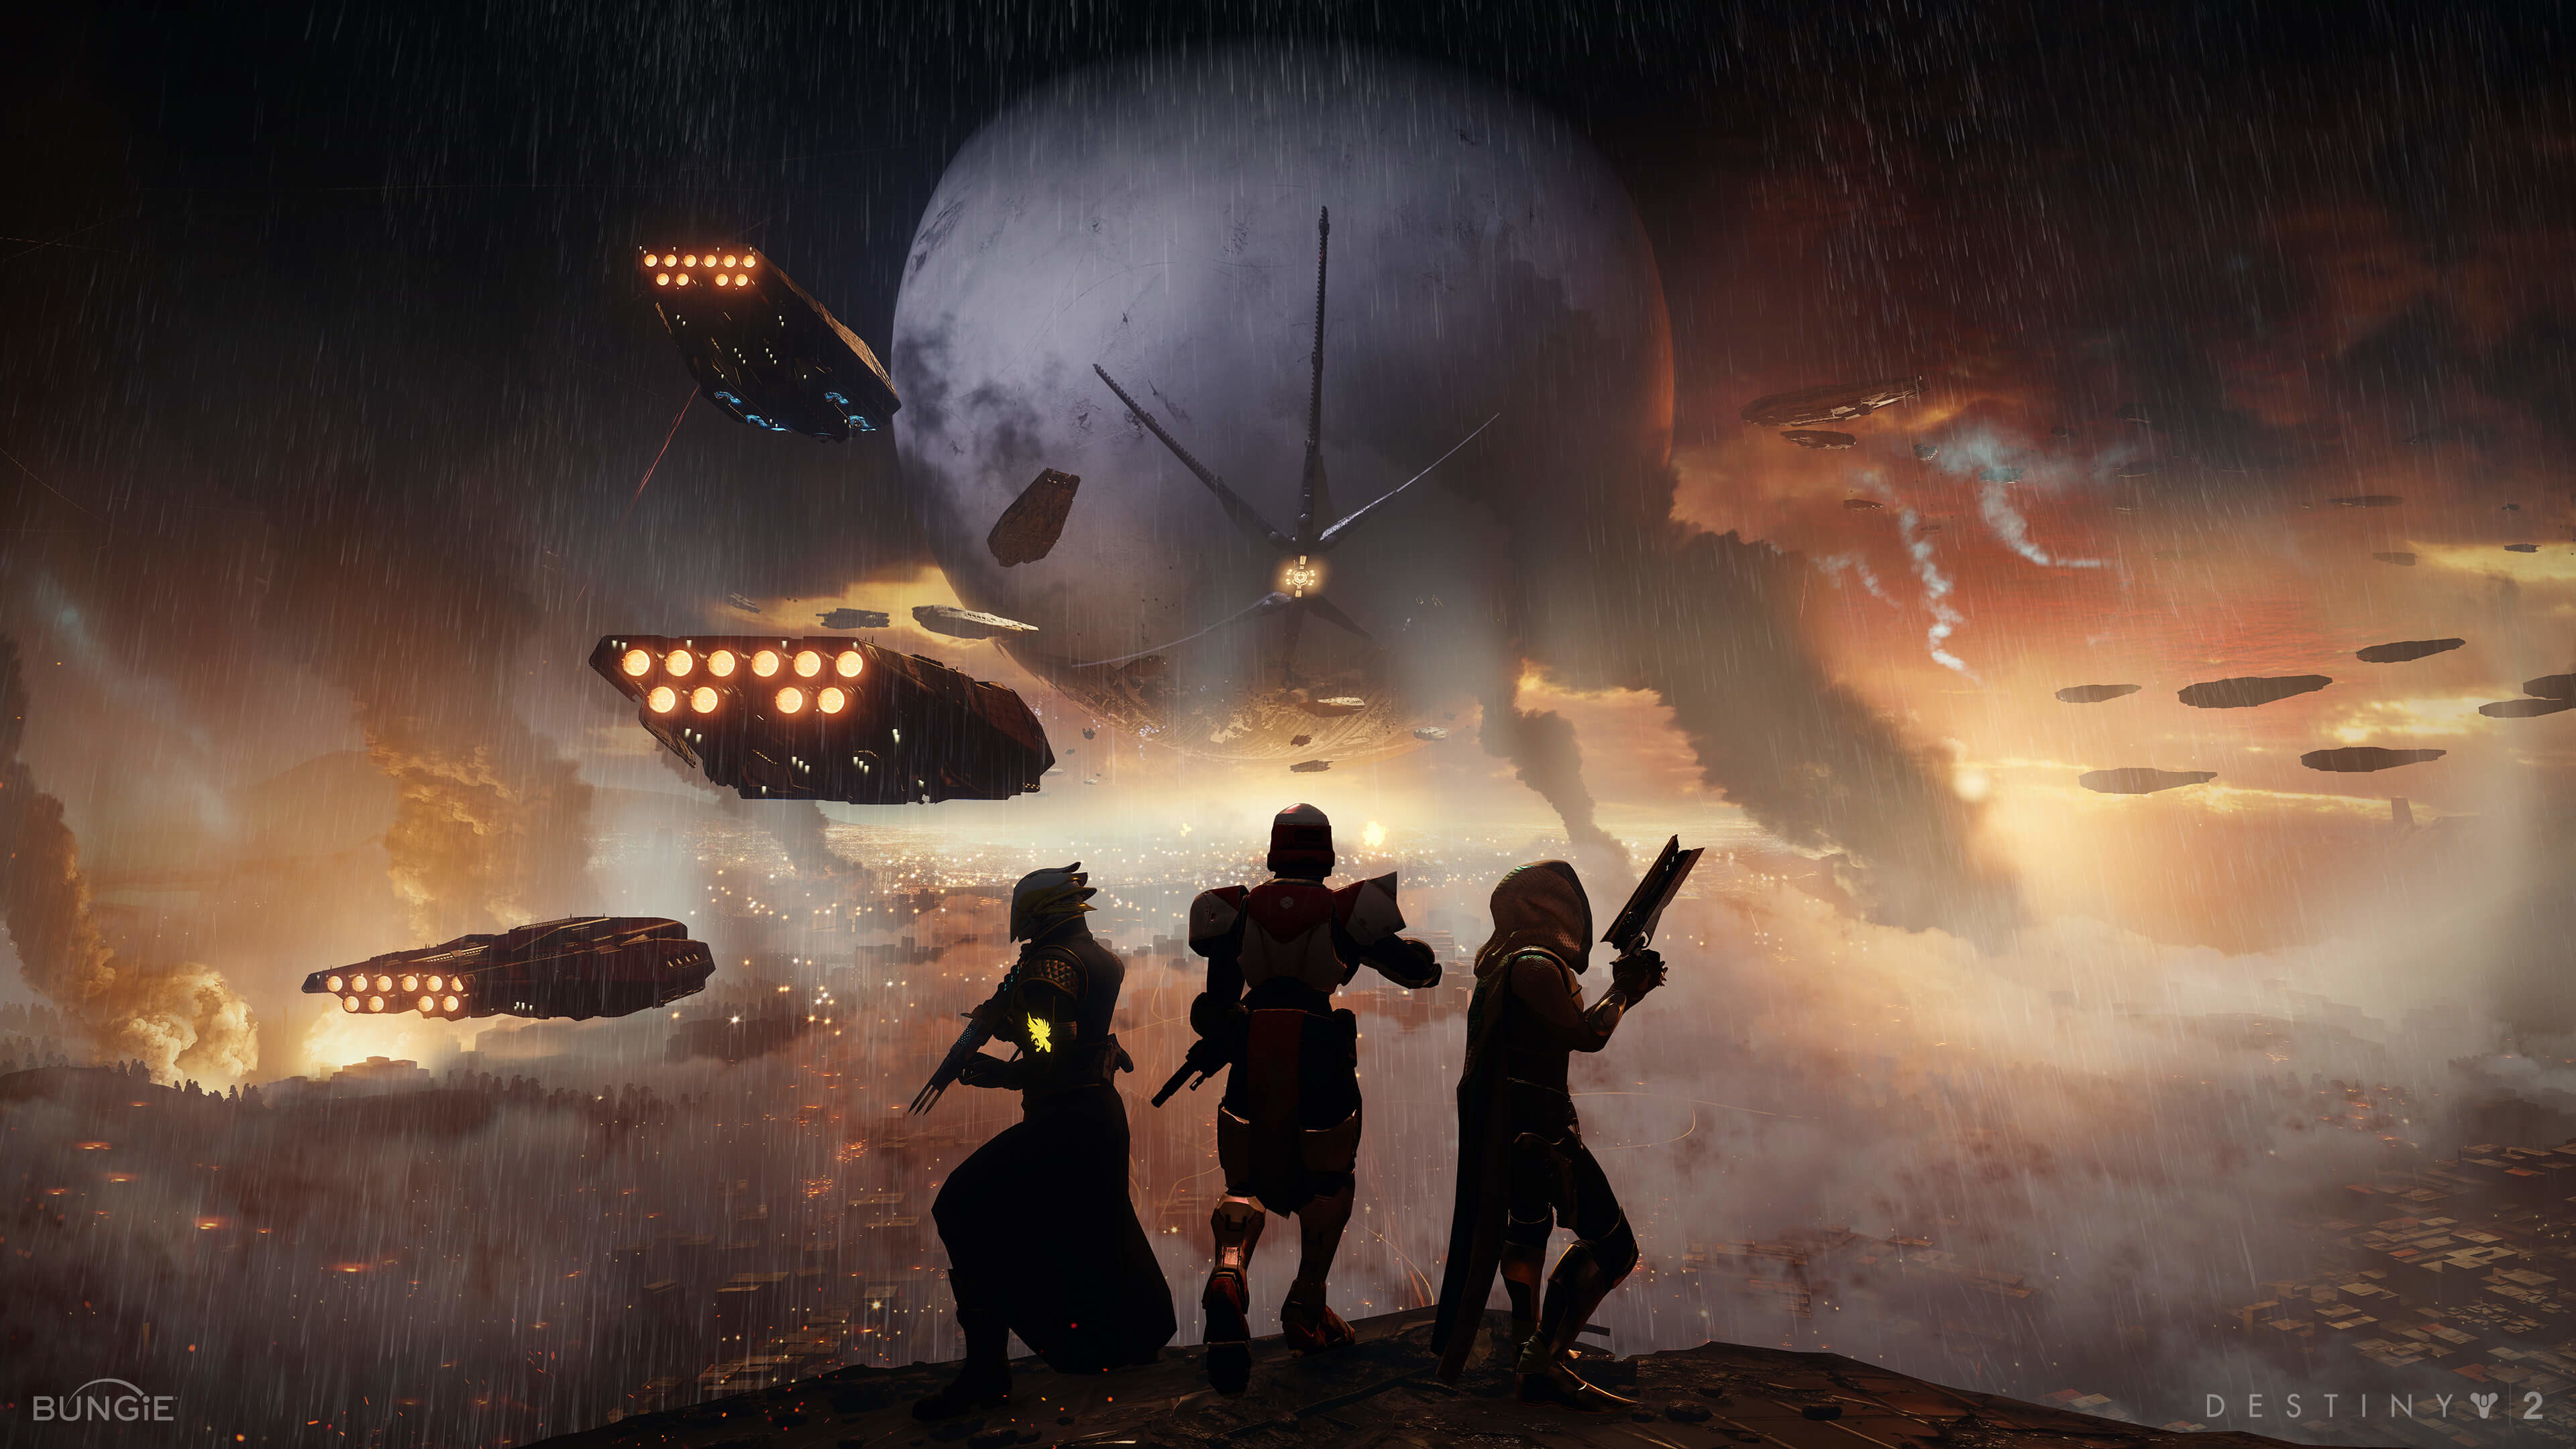 3840x2160 In case you wanted all of the Destiny 2 wallpaper images for Windows listed  below I put a zip file at the end of the article where you can download the  ...